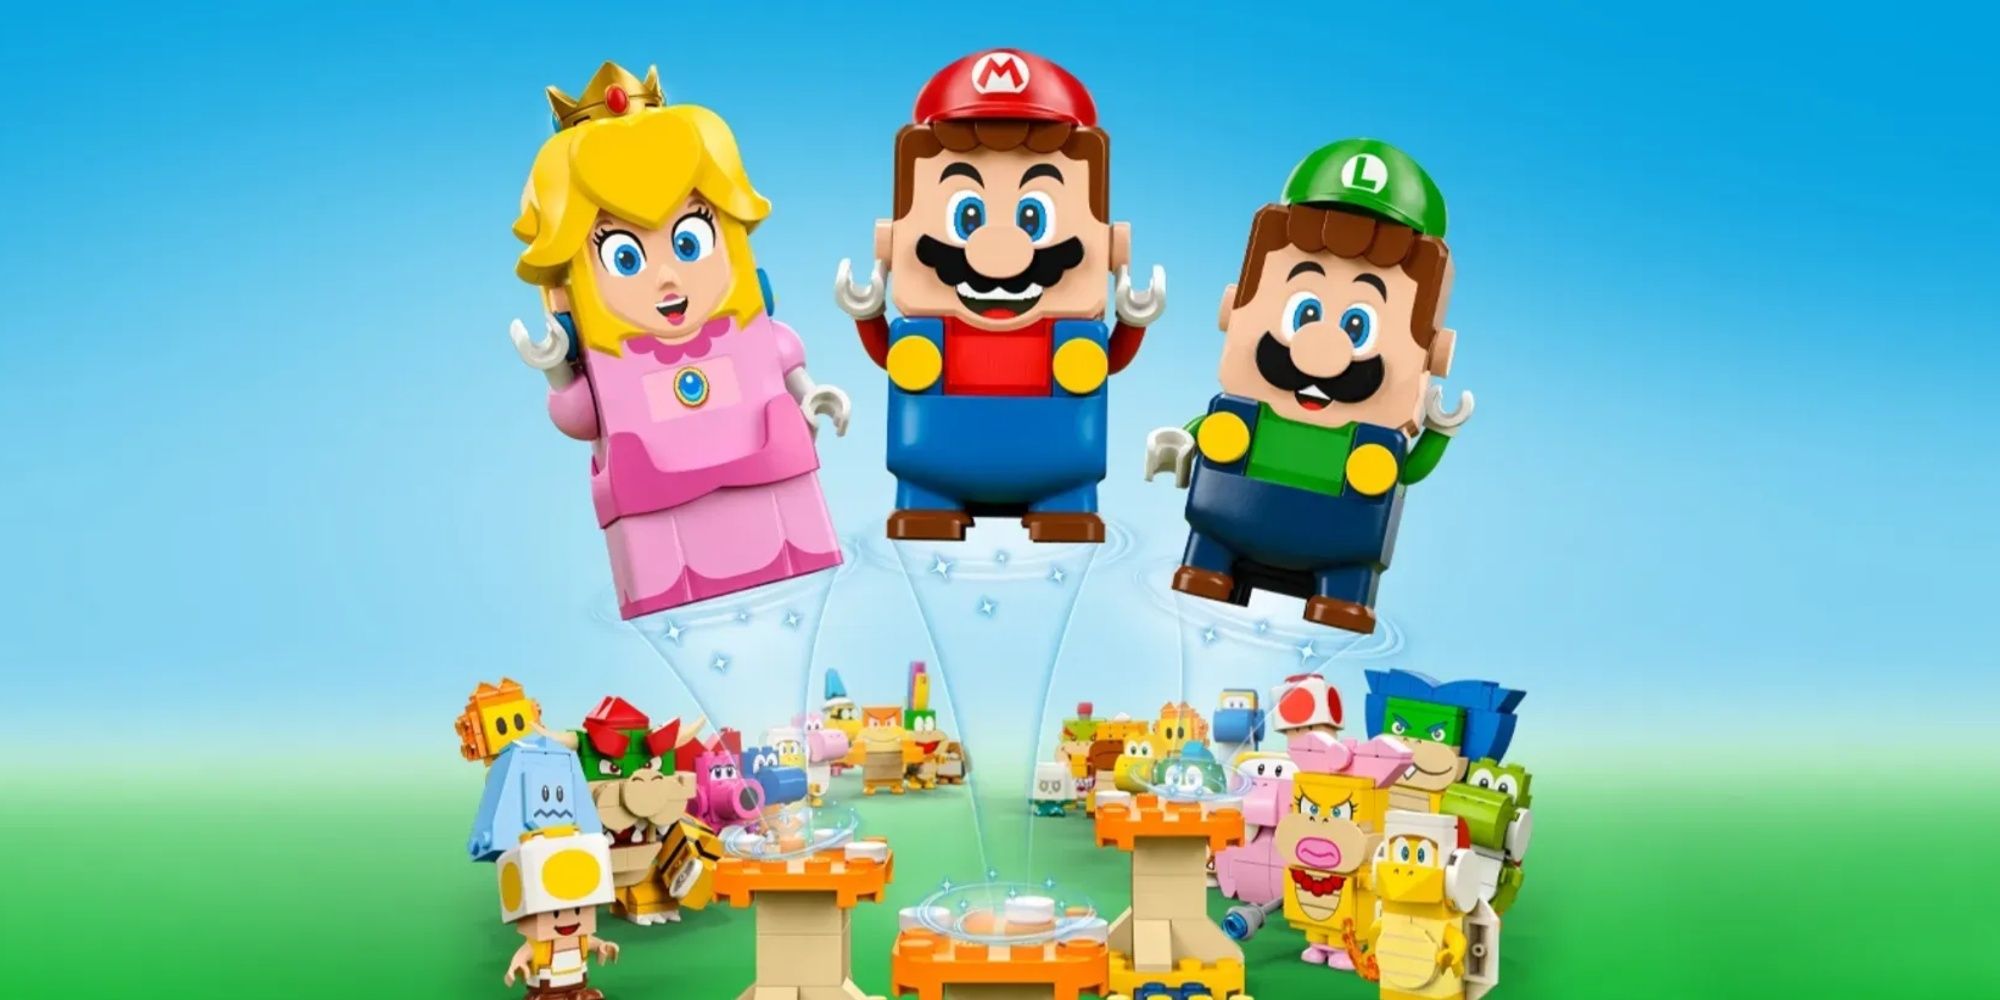 lego mario main characters jumping over supporting characters